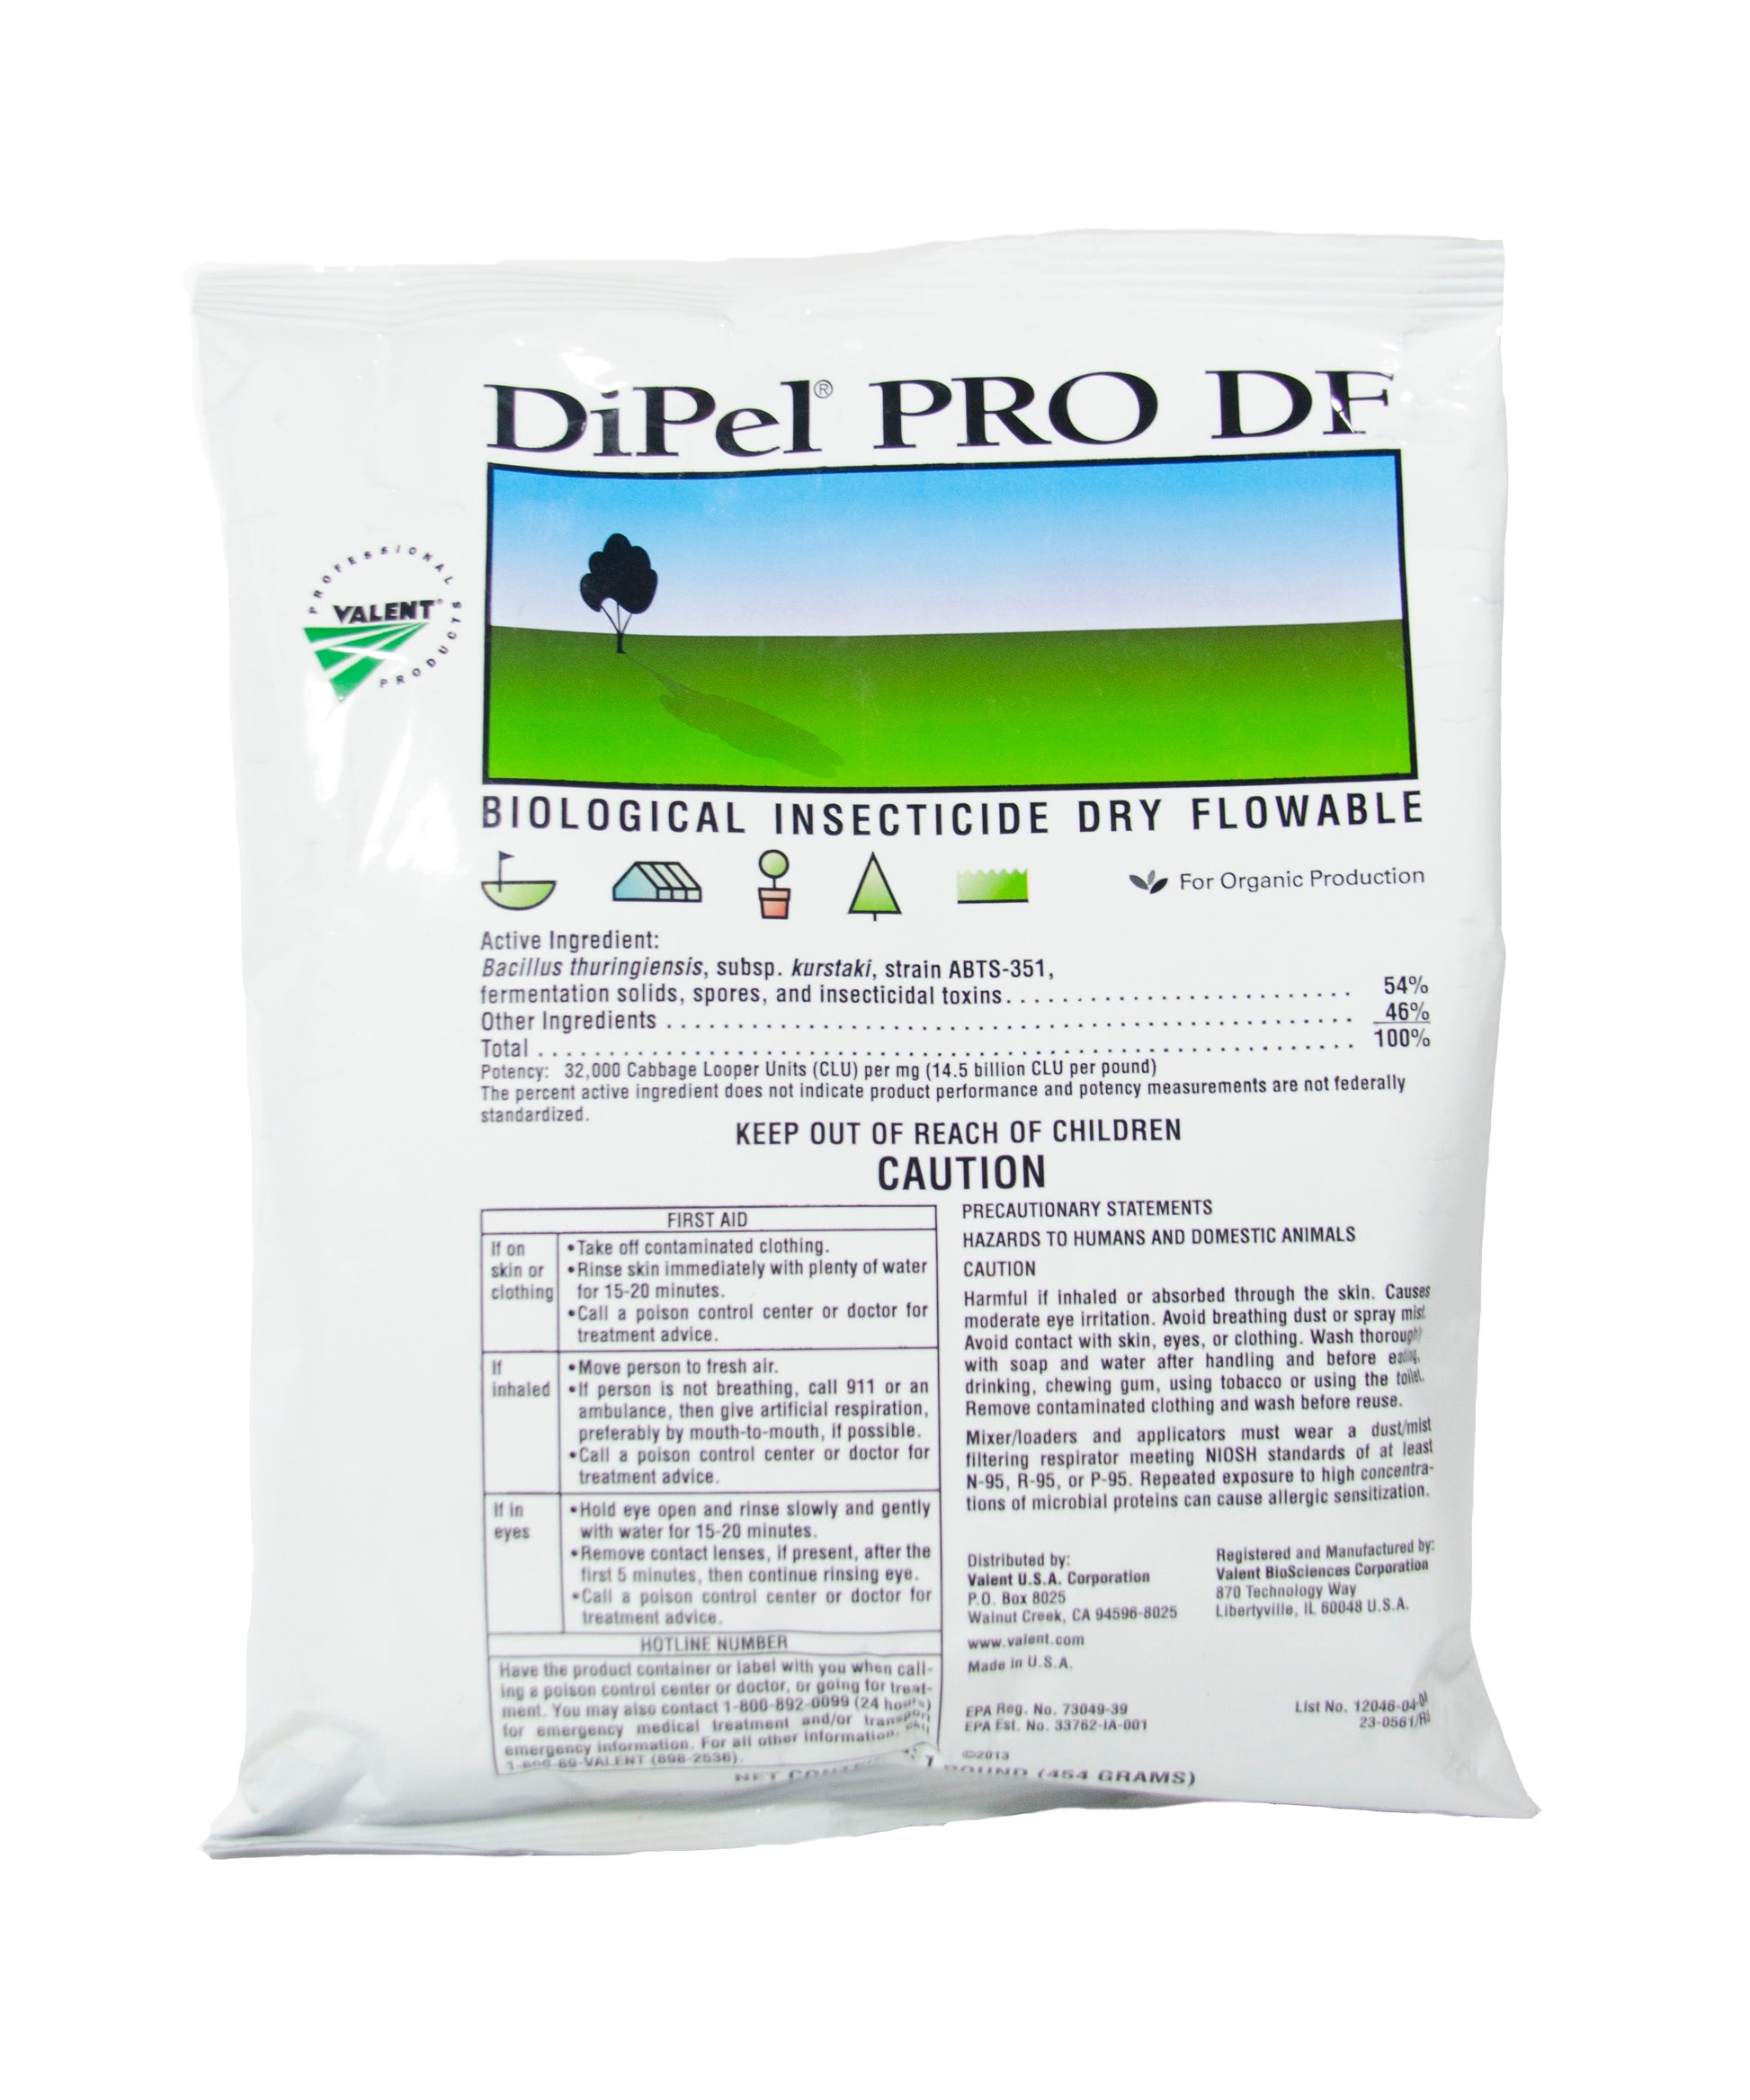 One pound bag of DiPel Pro DF. All natural biological instecticide made from Bacillus thuringiensis